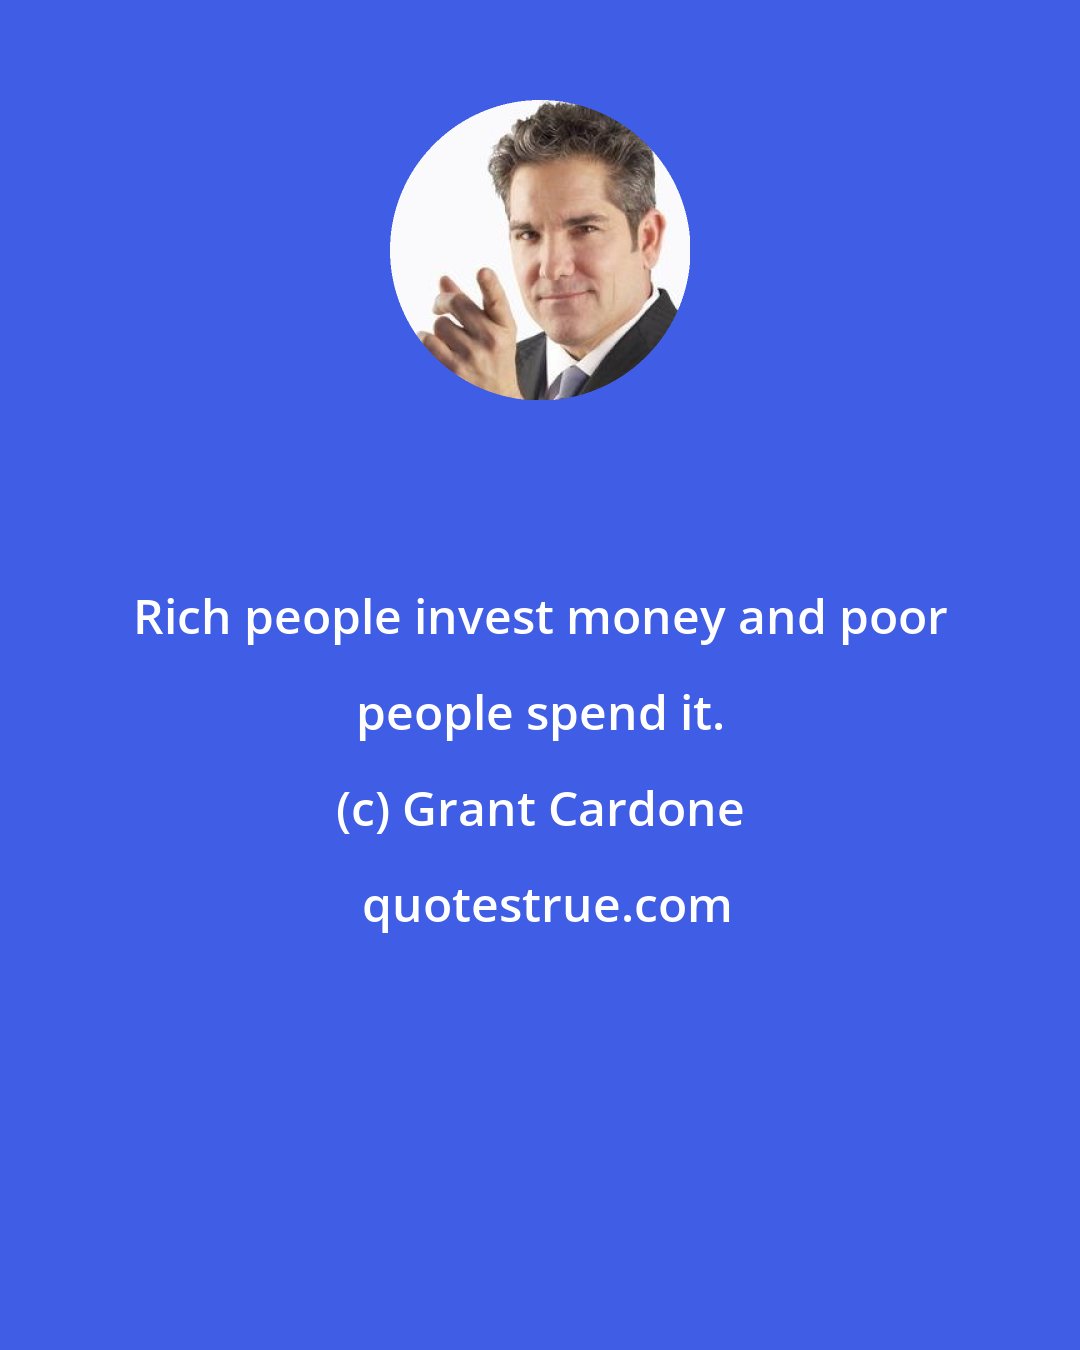 Grant Cardone: Rich people invest money and poor people spend it.